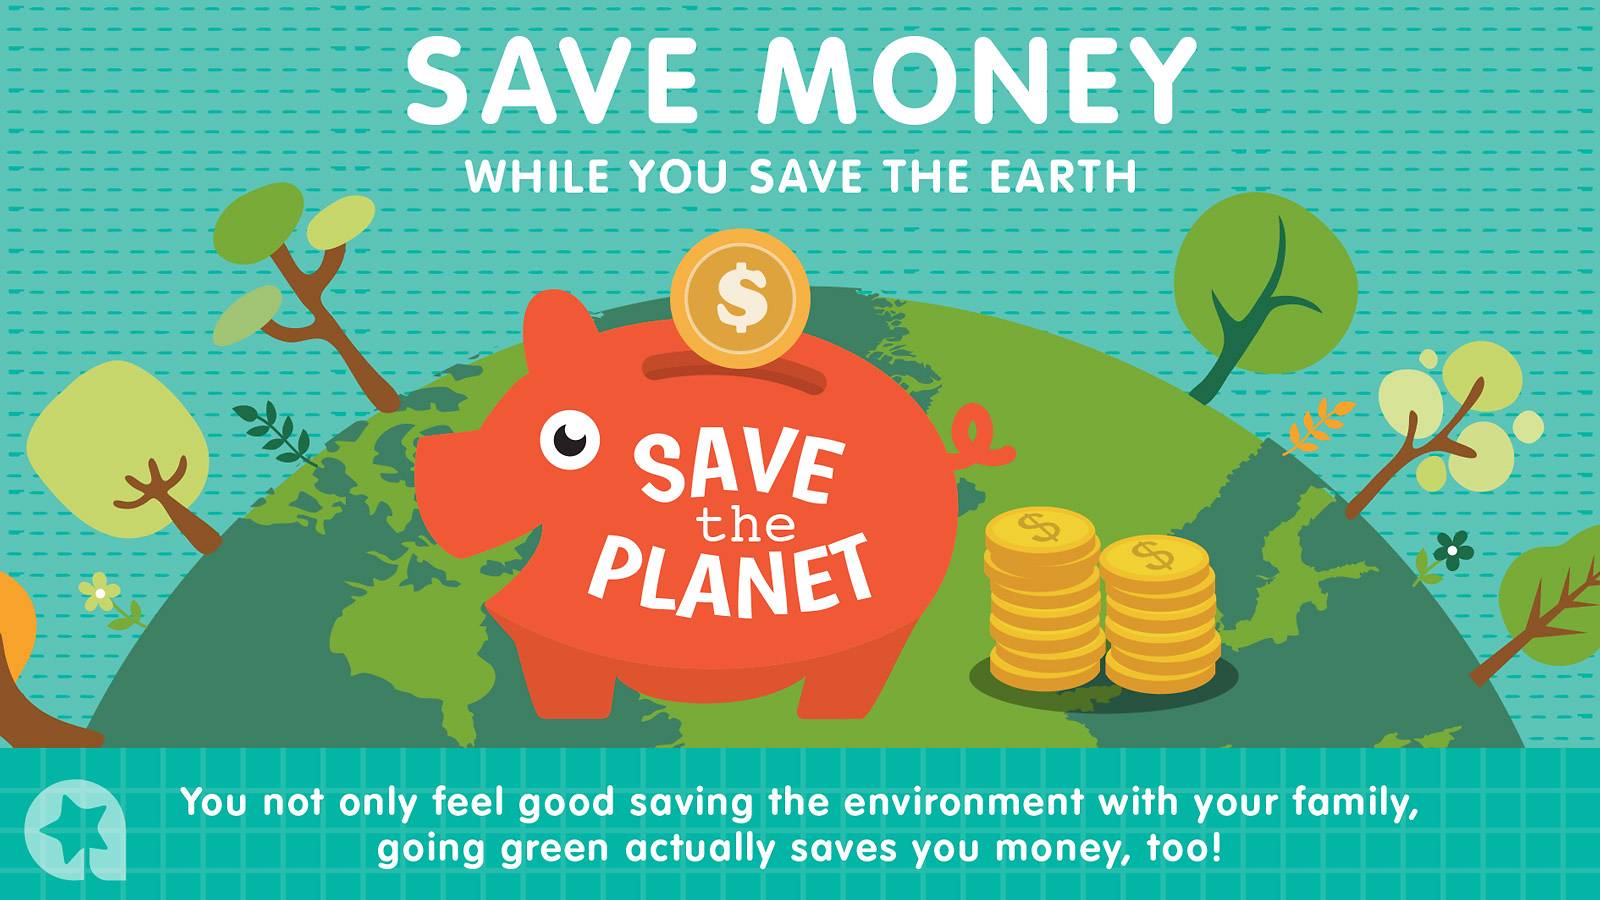 Parents--Save-money-while-you-save-the-Earth-main (1)